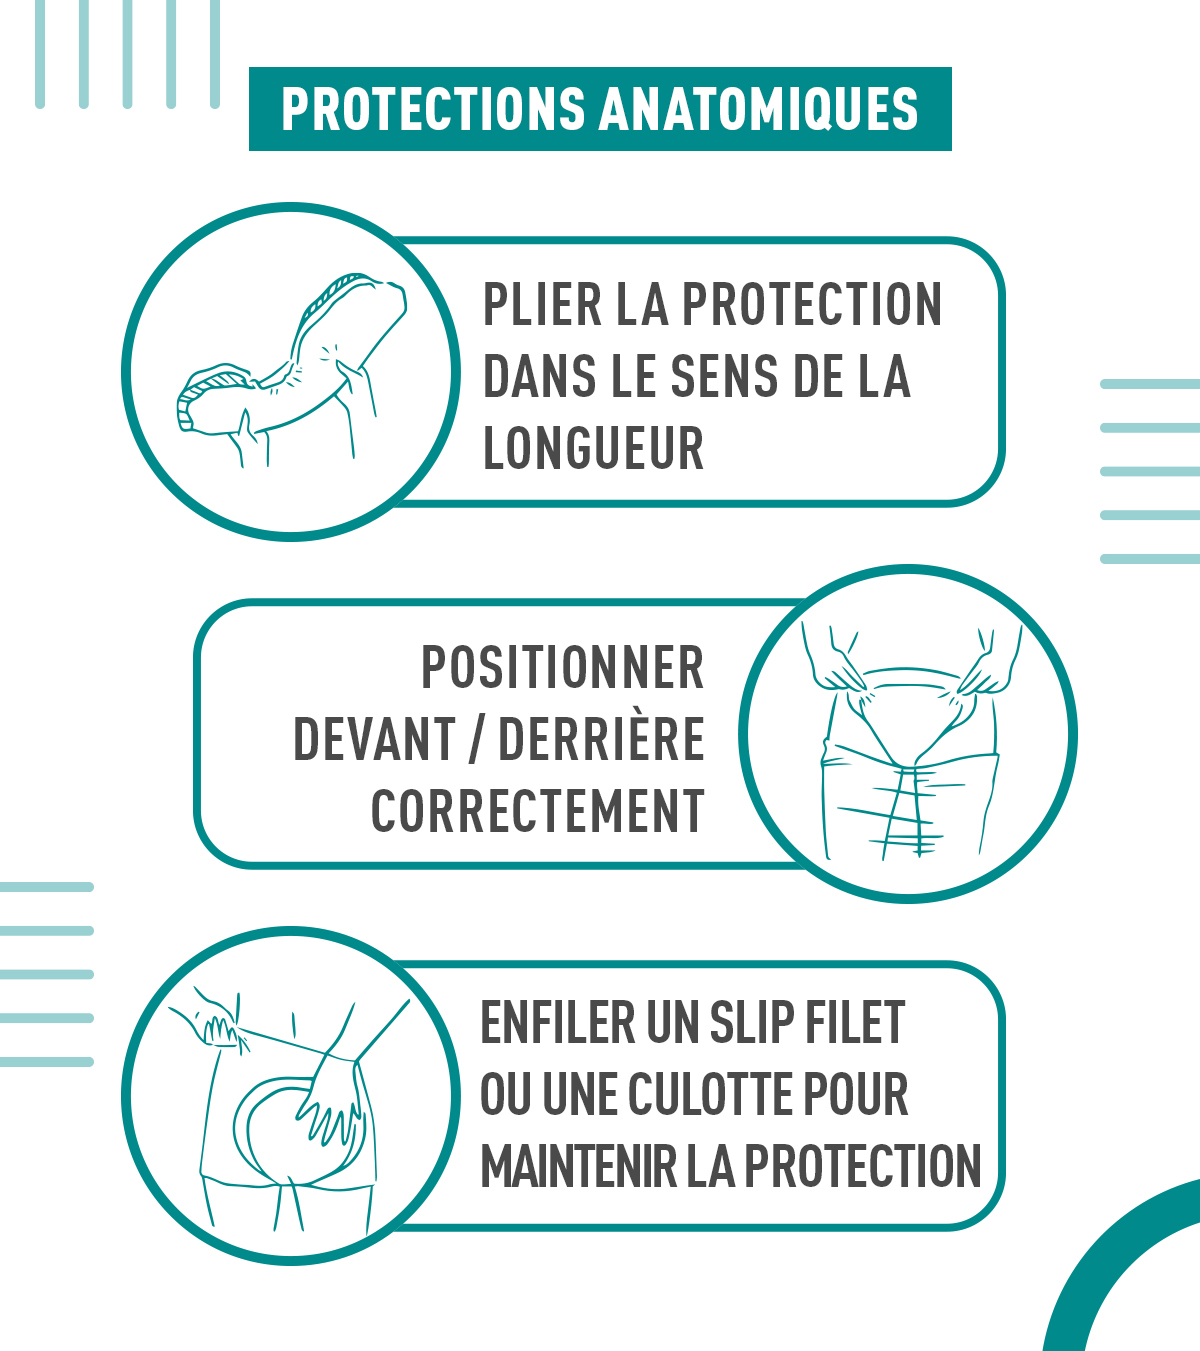 Protections anatomiques